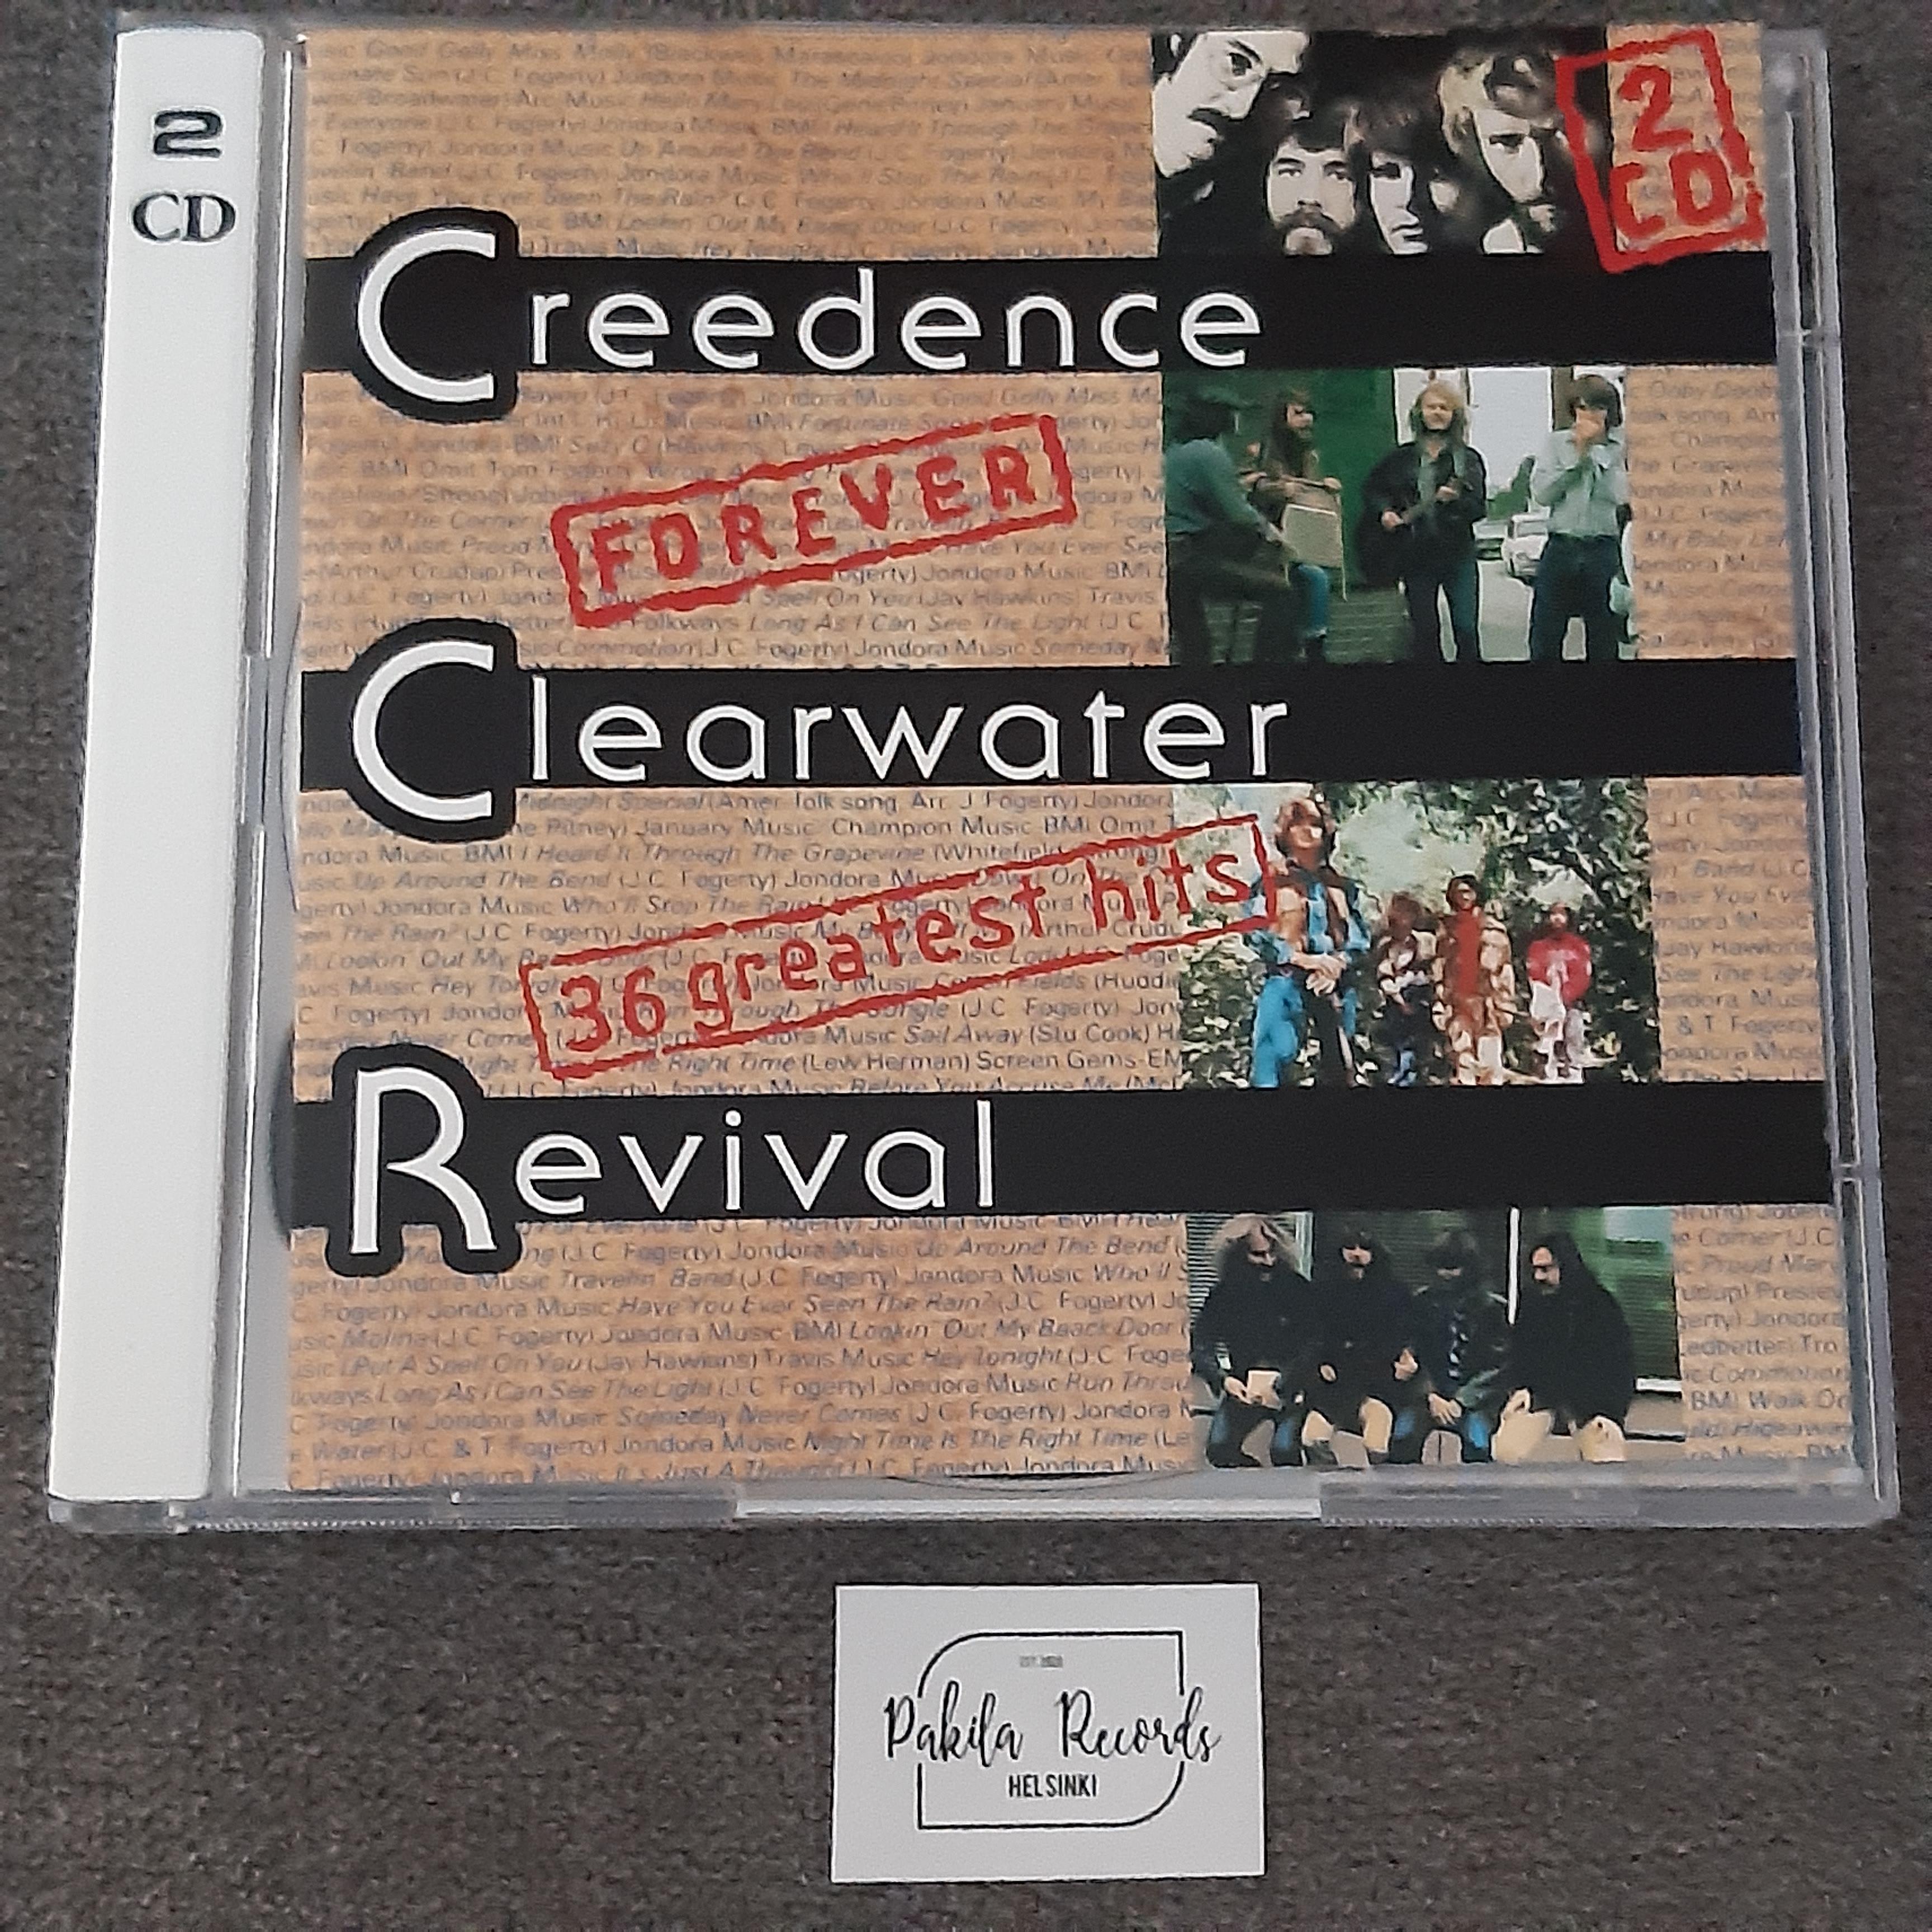 Creedence Clearwater Revival - CCR Forever, 36 Greatest Hits - 2 CD (käytetty)